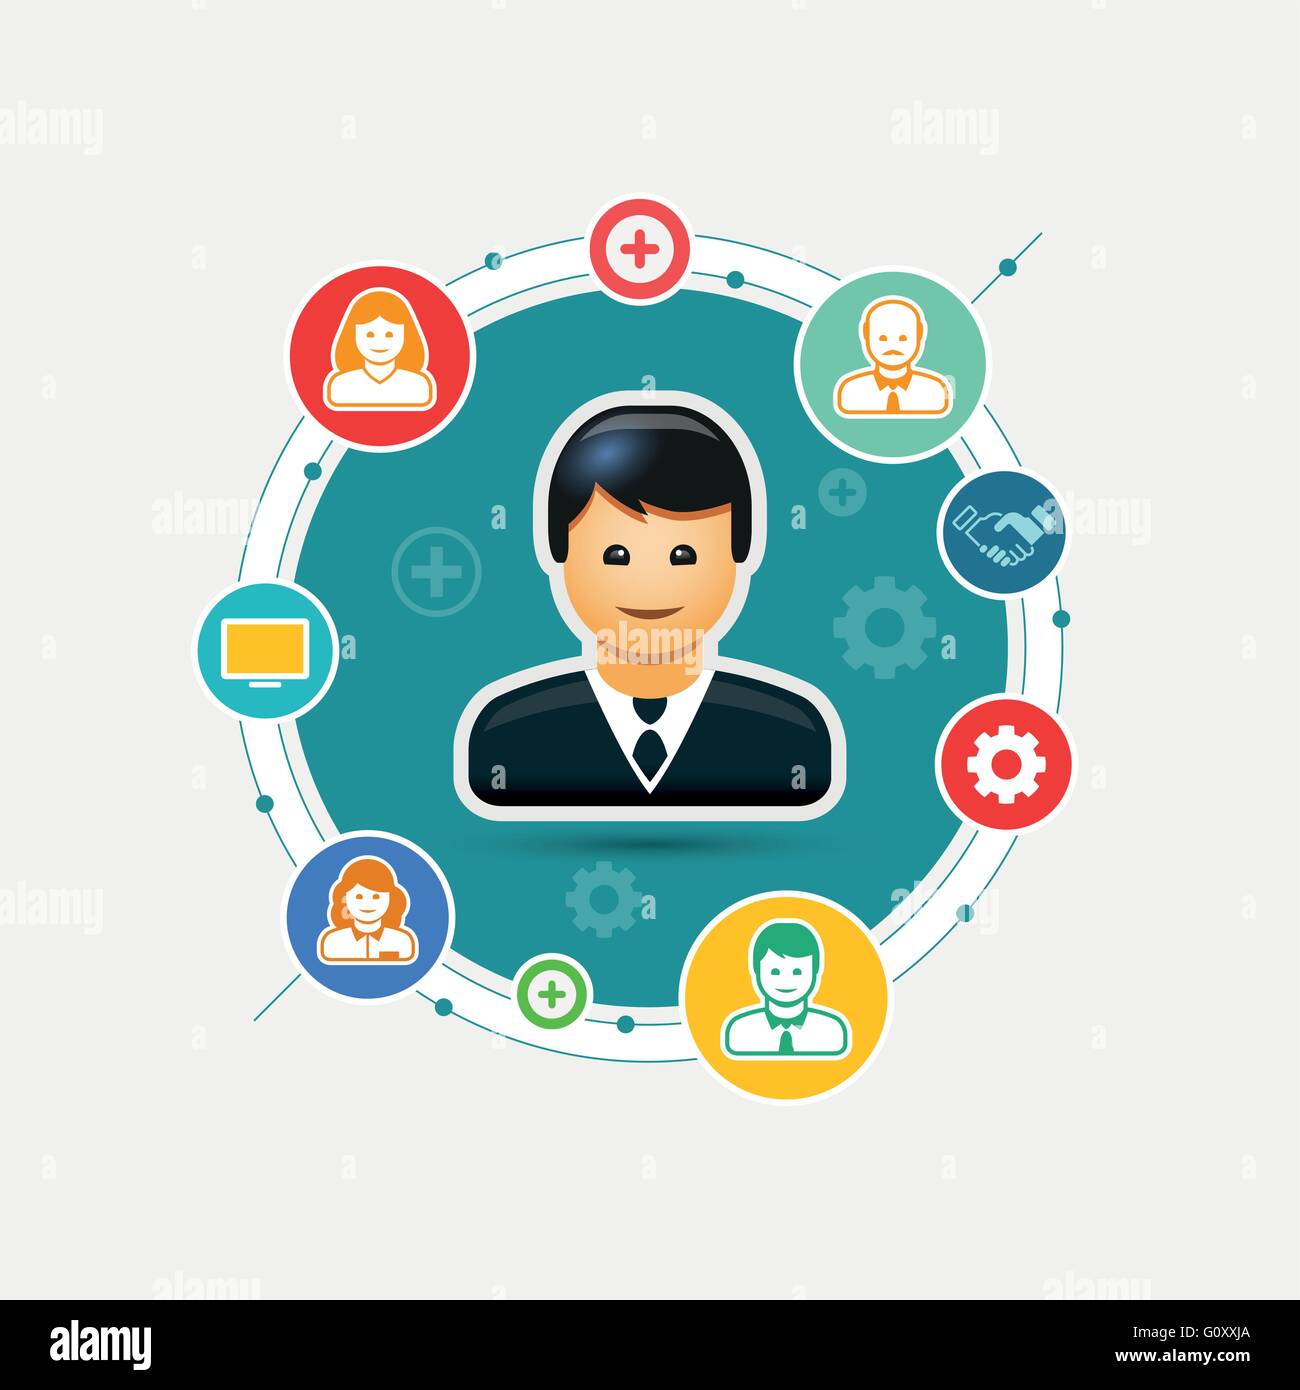 Vector business people organization illustration. EPS10 file. Stock Vector